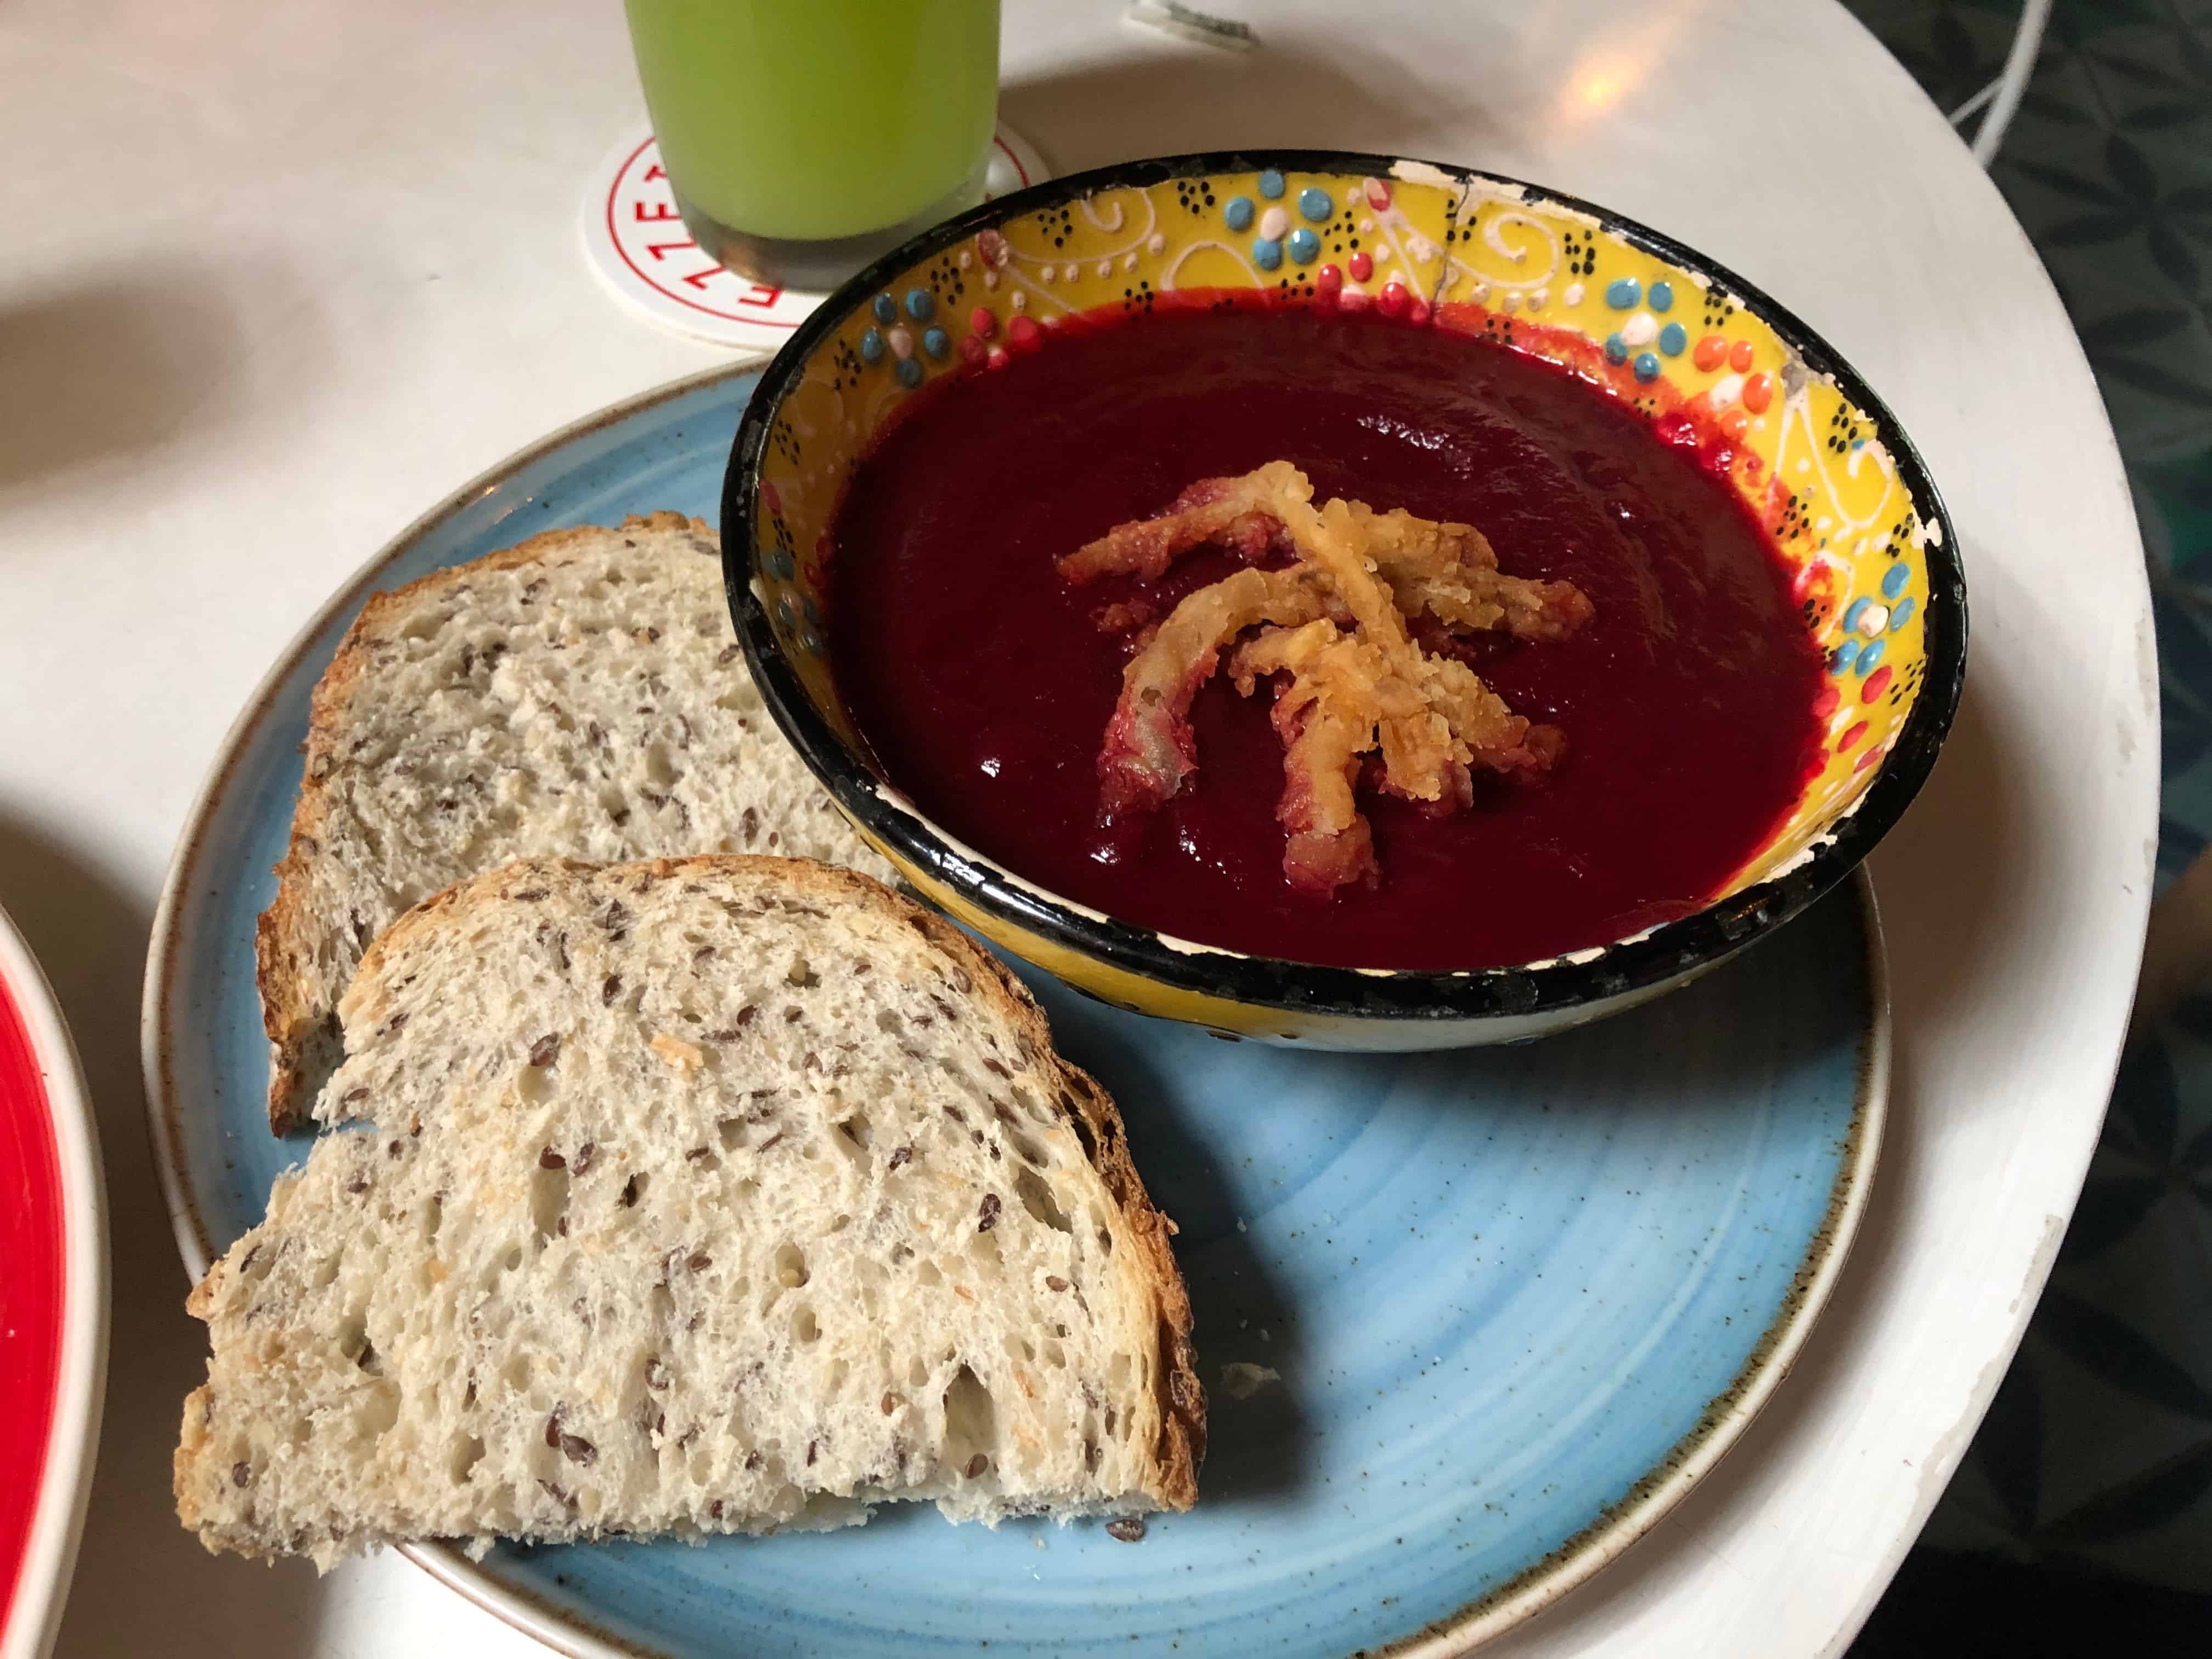 Carrot and beet soup at Lezzet Cafe Turco in El Poblado, Medellín, Antioquia, Colombia